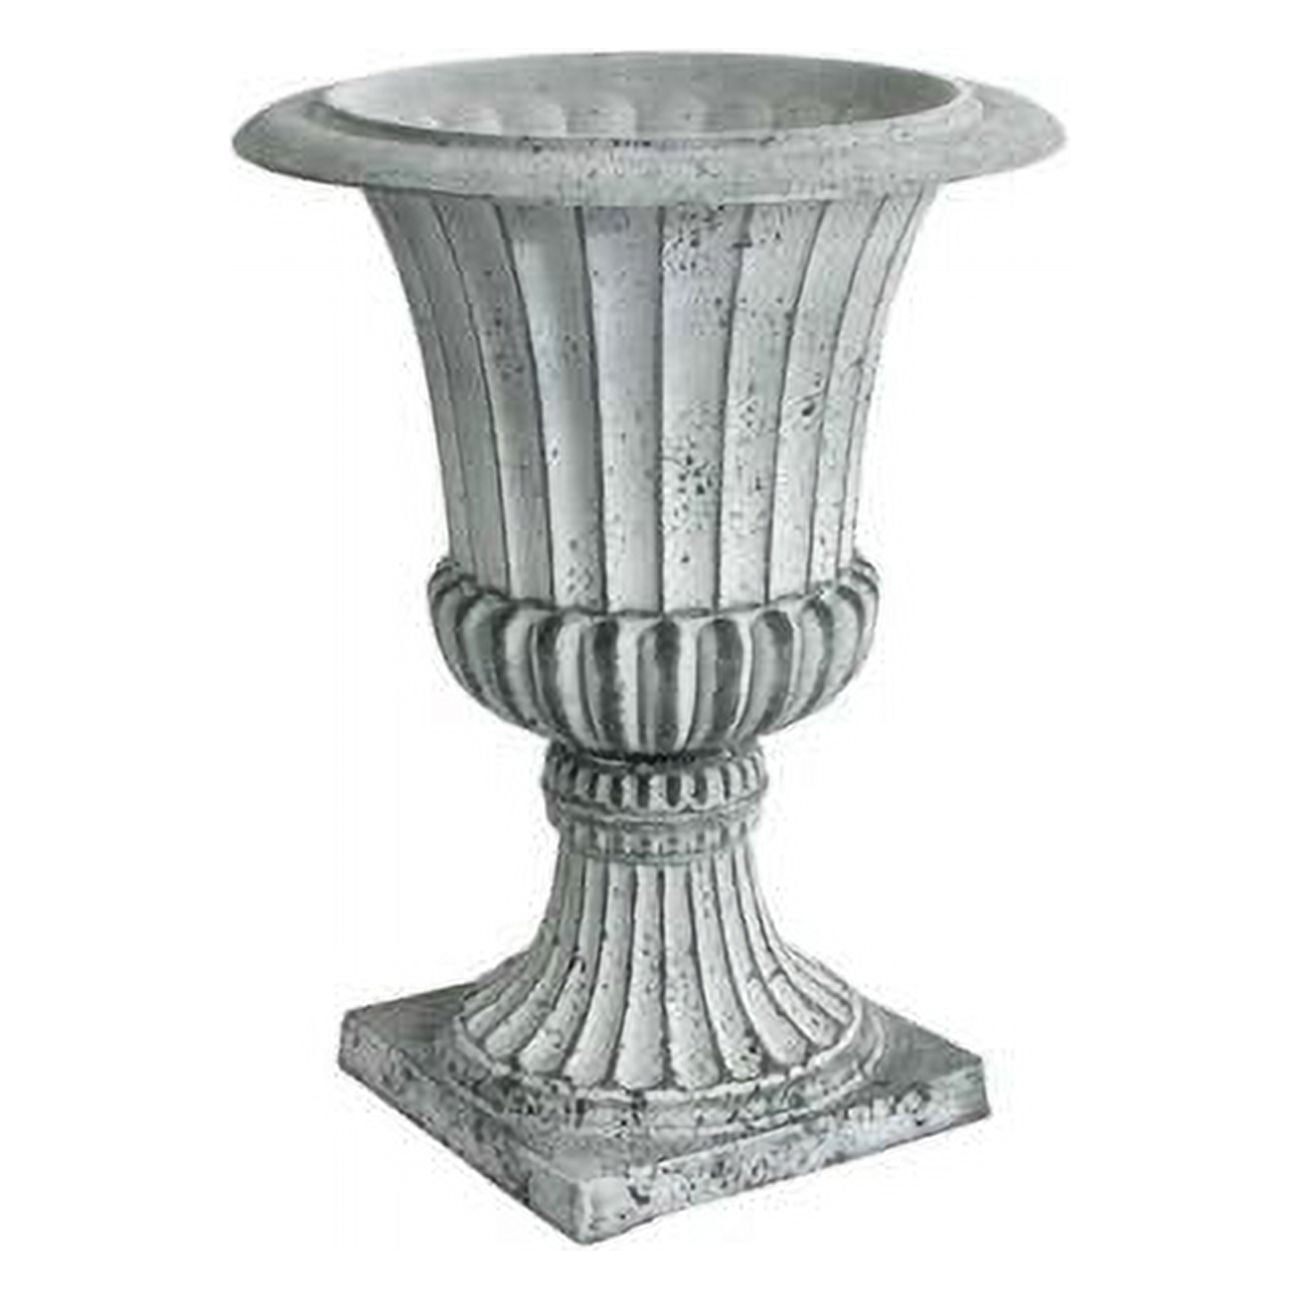 Picture of Algreen Products 42641 16.25 in. Dia. x 21.25 in. Acerra Planter & Urn Planter - Concrete